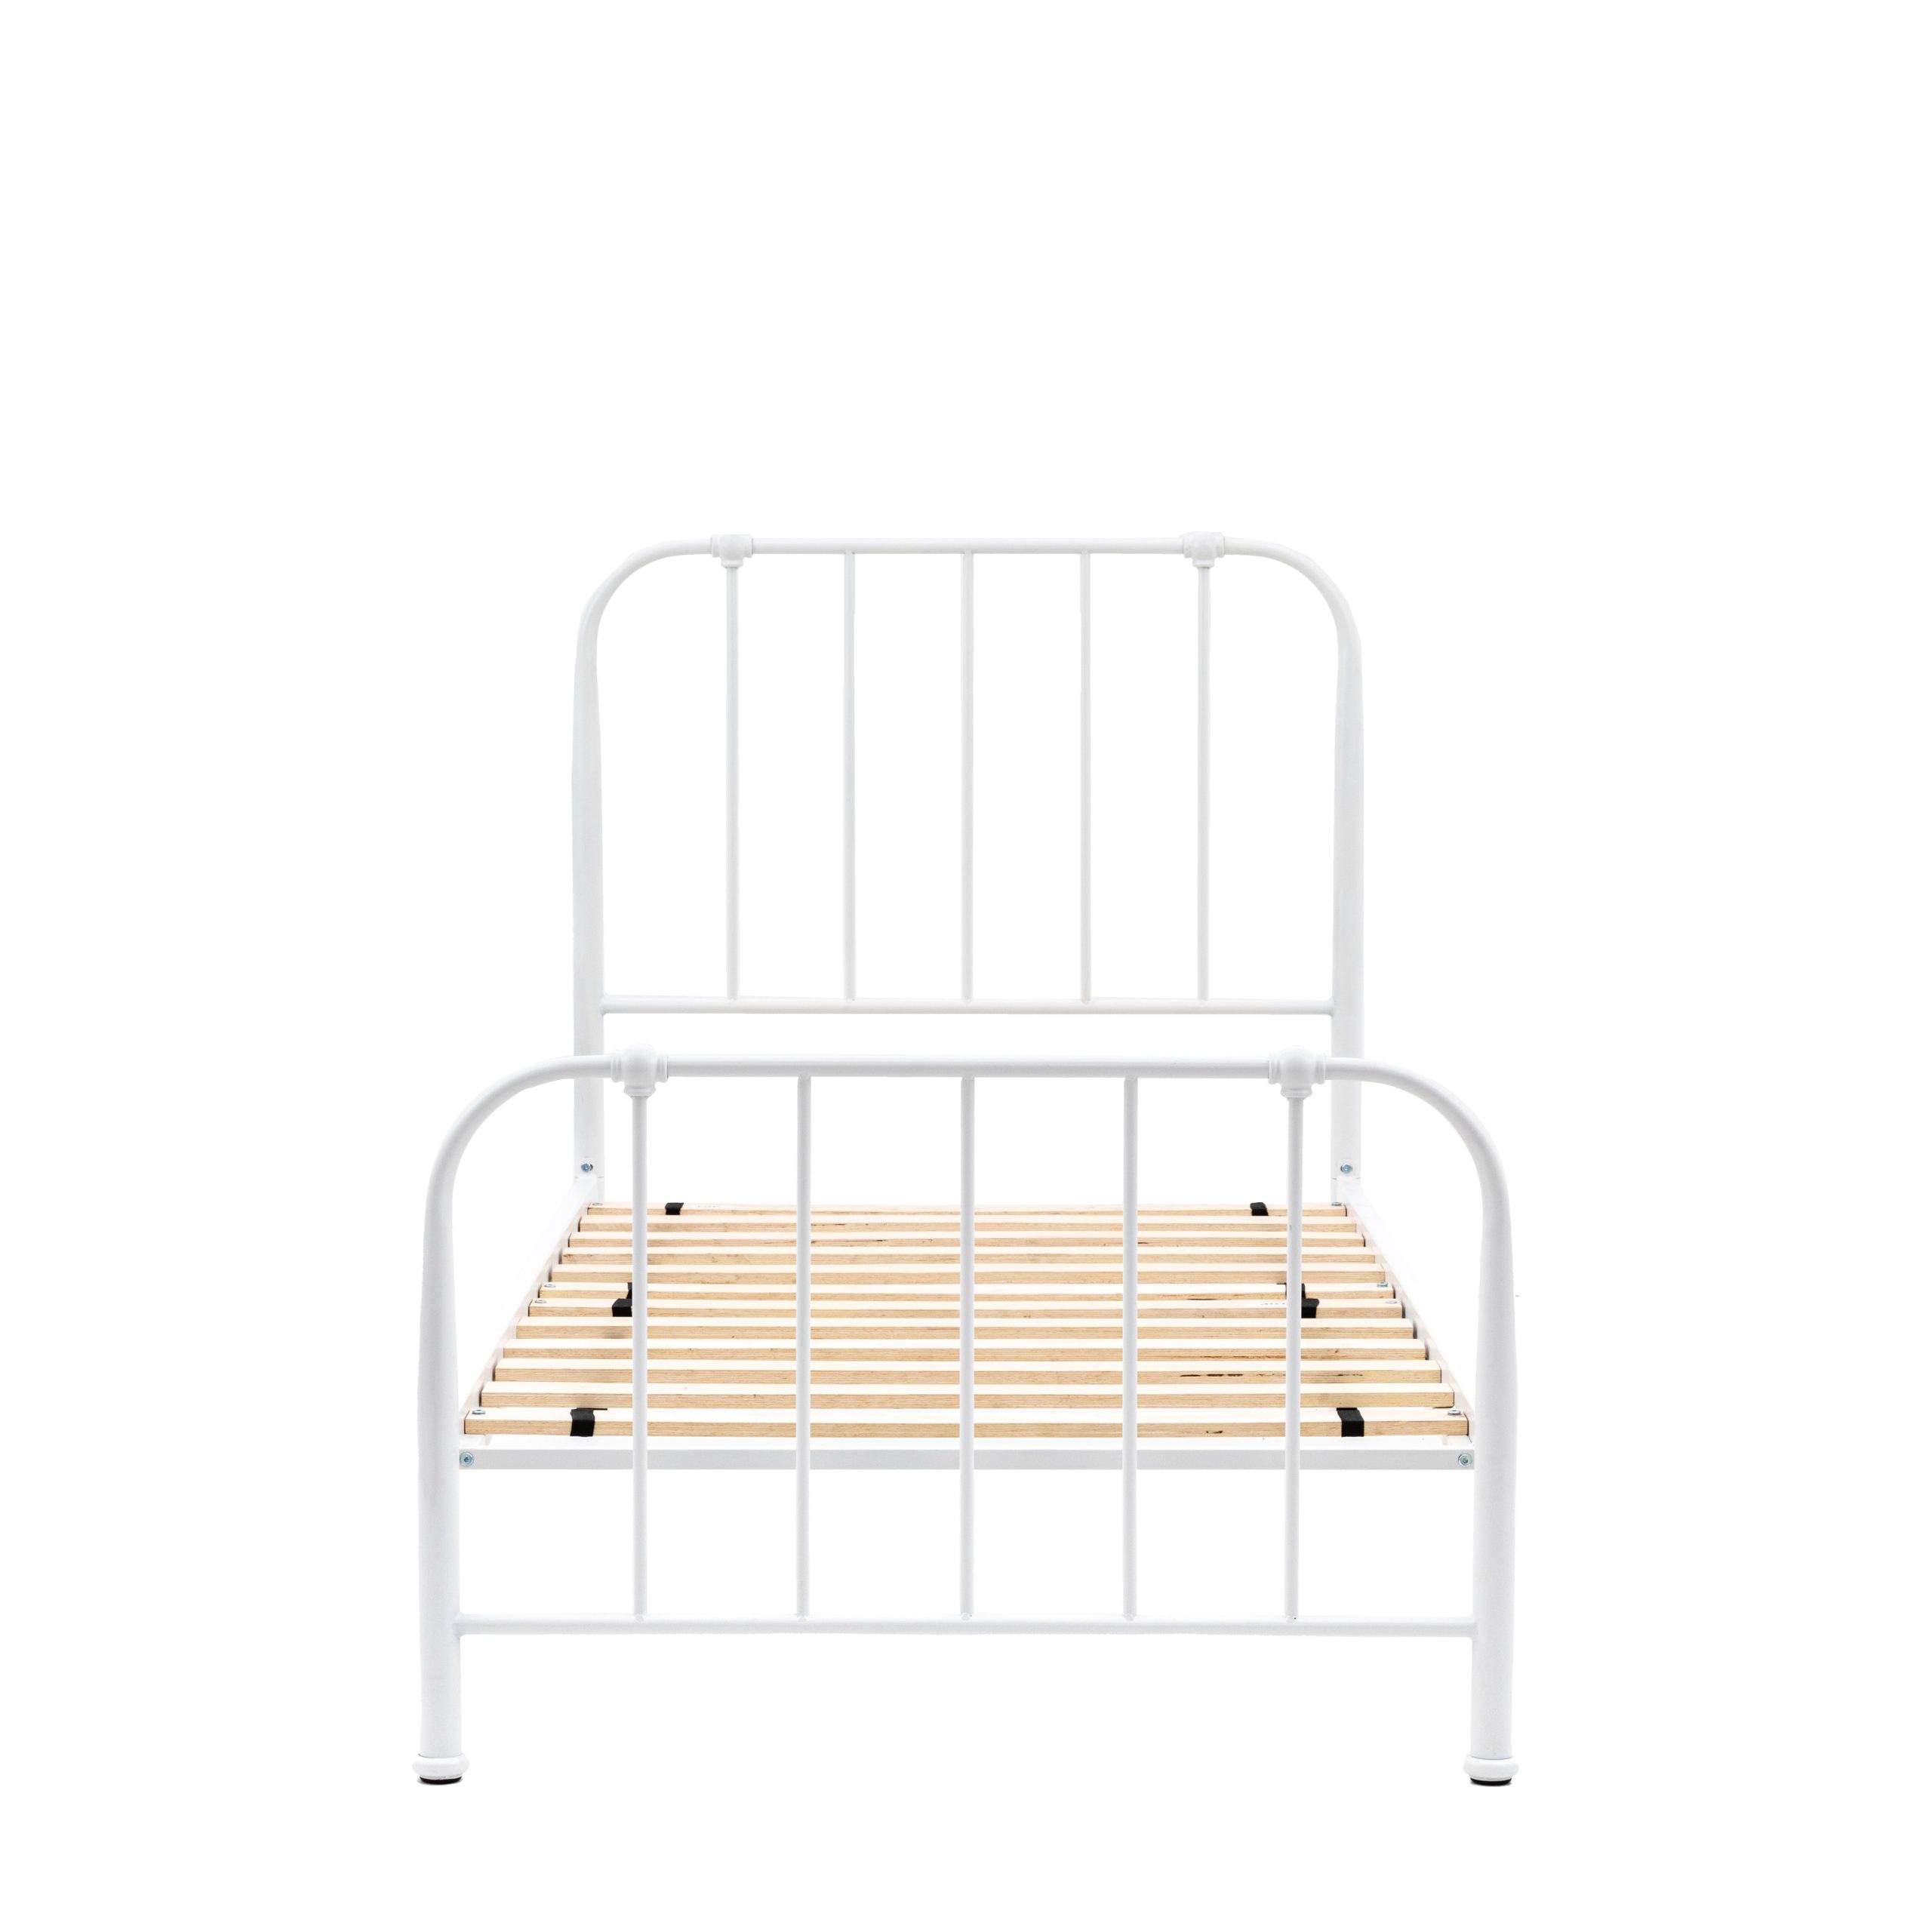 Gallery Direct Loughton 3' Bedstead Ivory